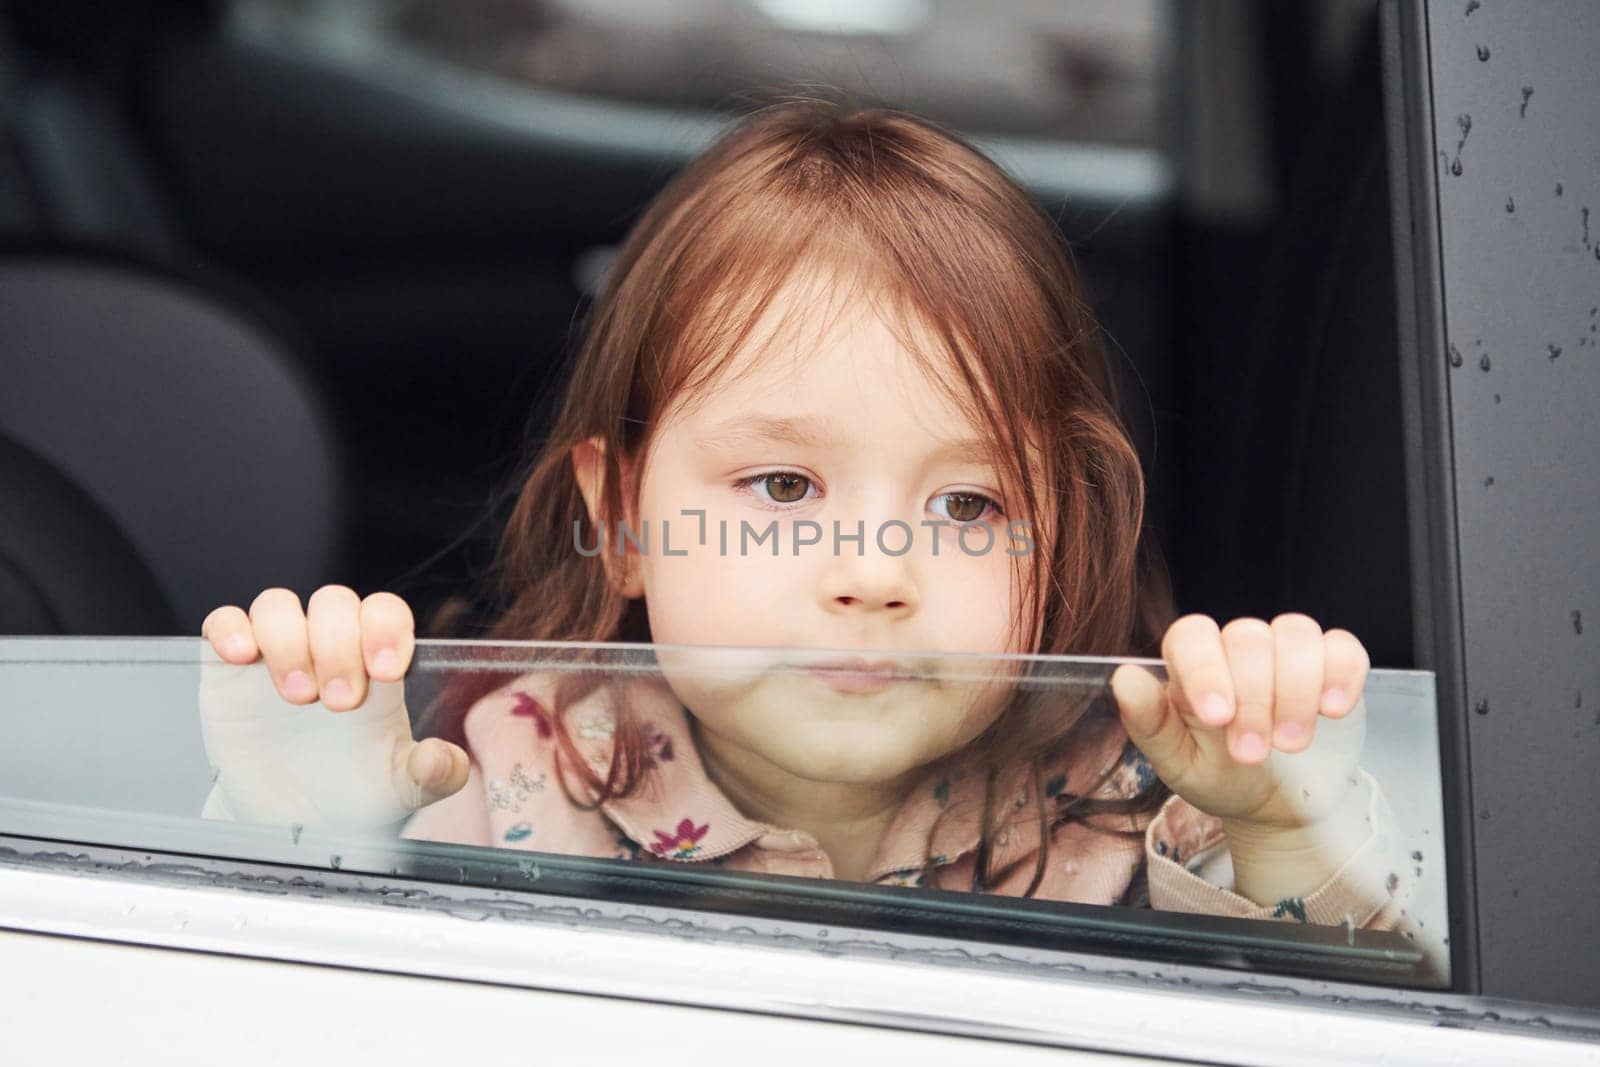 Cute little girl looks through window car. Conception of traveling and vaccation.